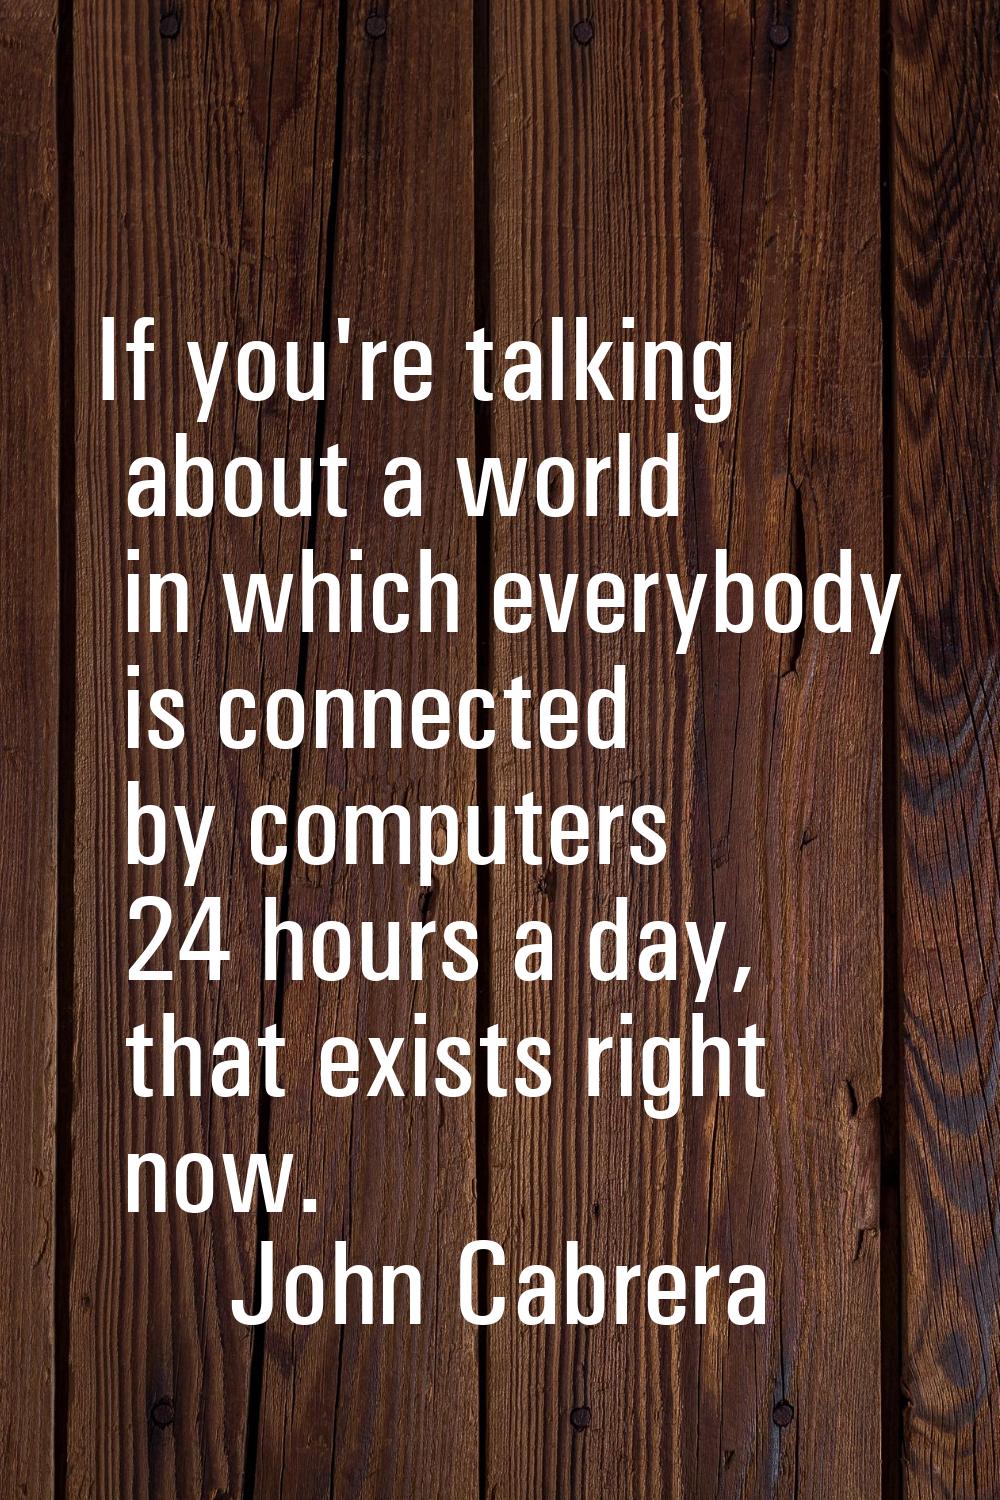 If you're talking about a world in which everybody is connected by computers 24 hours a day, that e